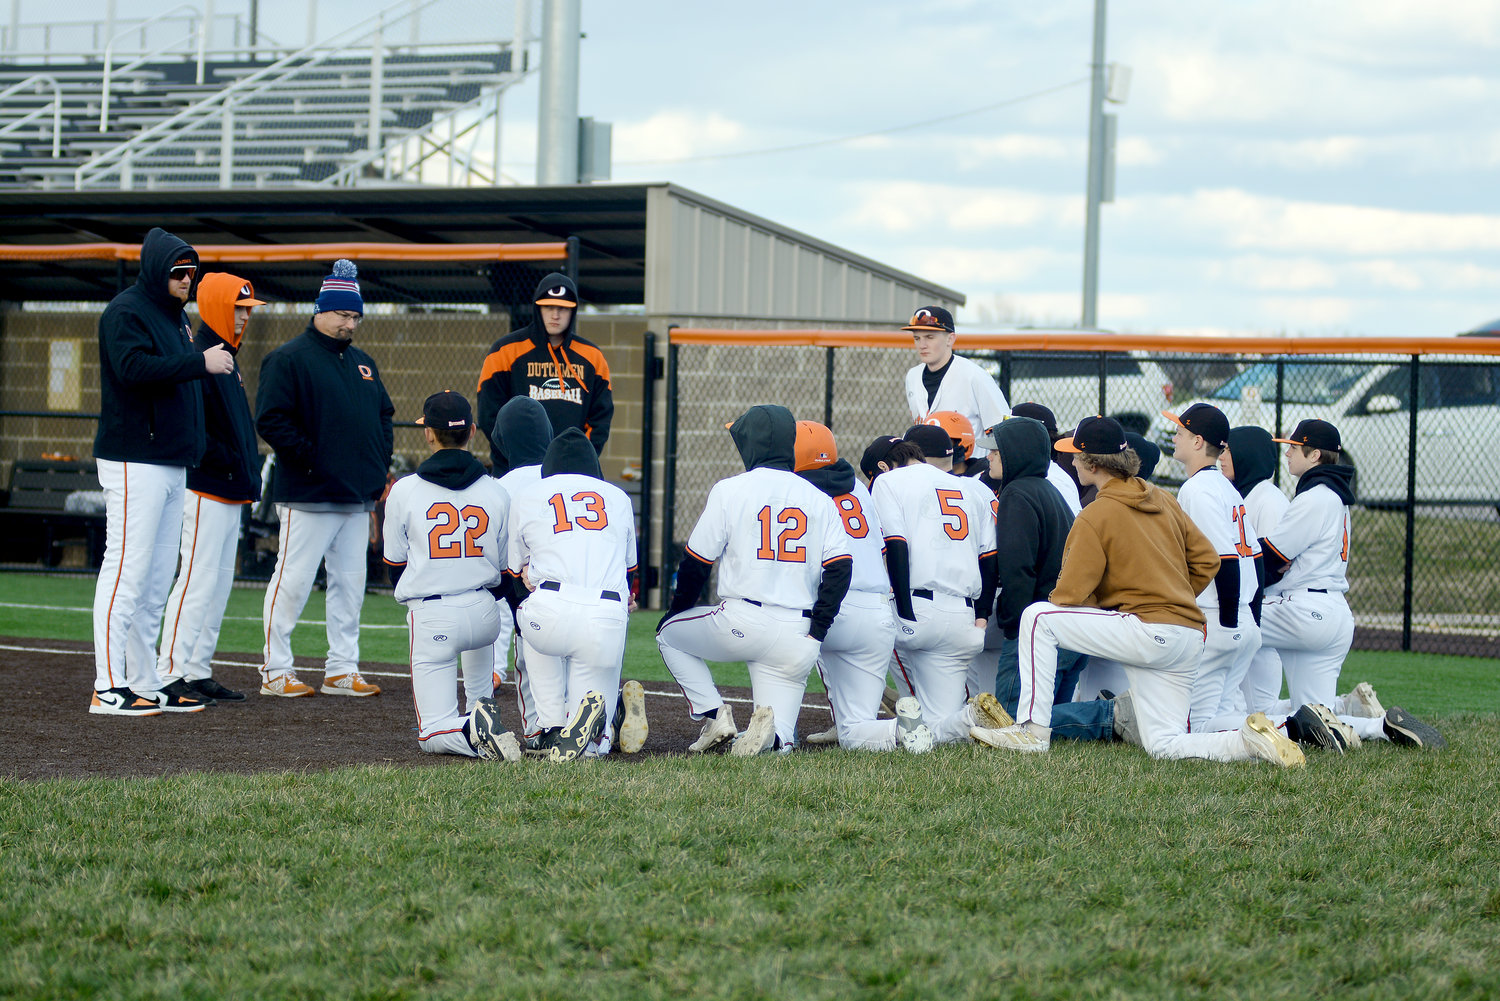 Steven Kemp (far left) addresses his Owensville Dutchmen baseball team following a 14-4 loss Friday afternoon to St. Clair’s Bulldogs at OHS Field during the opening round of the Four Rivers Conference (FRC) Preseason Baseball Tournament. Able to bounce back Monday night in the consolation semifinals against New Haven, Kemp picked up his first win as Dutchmen head baseball coach with a 12-0 victory in five innings over the visiting Shamrocks.